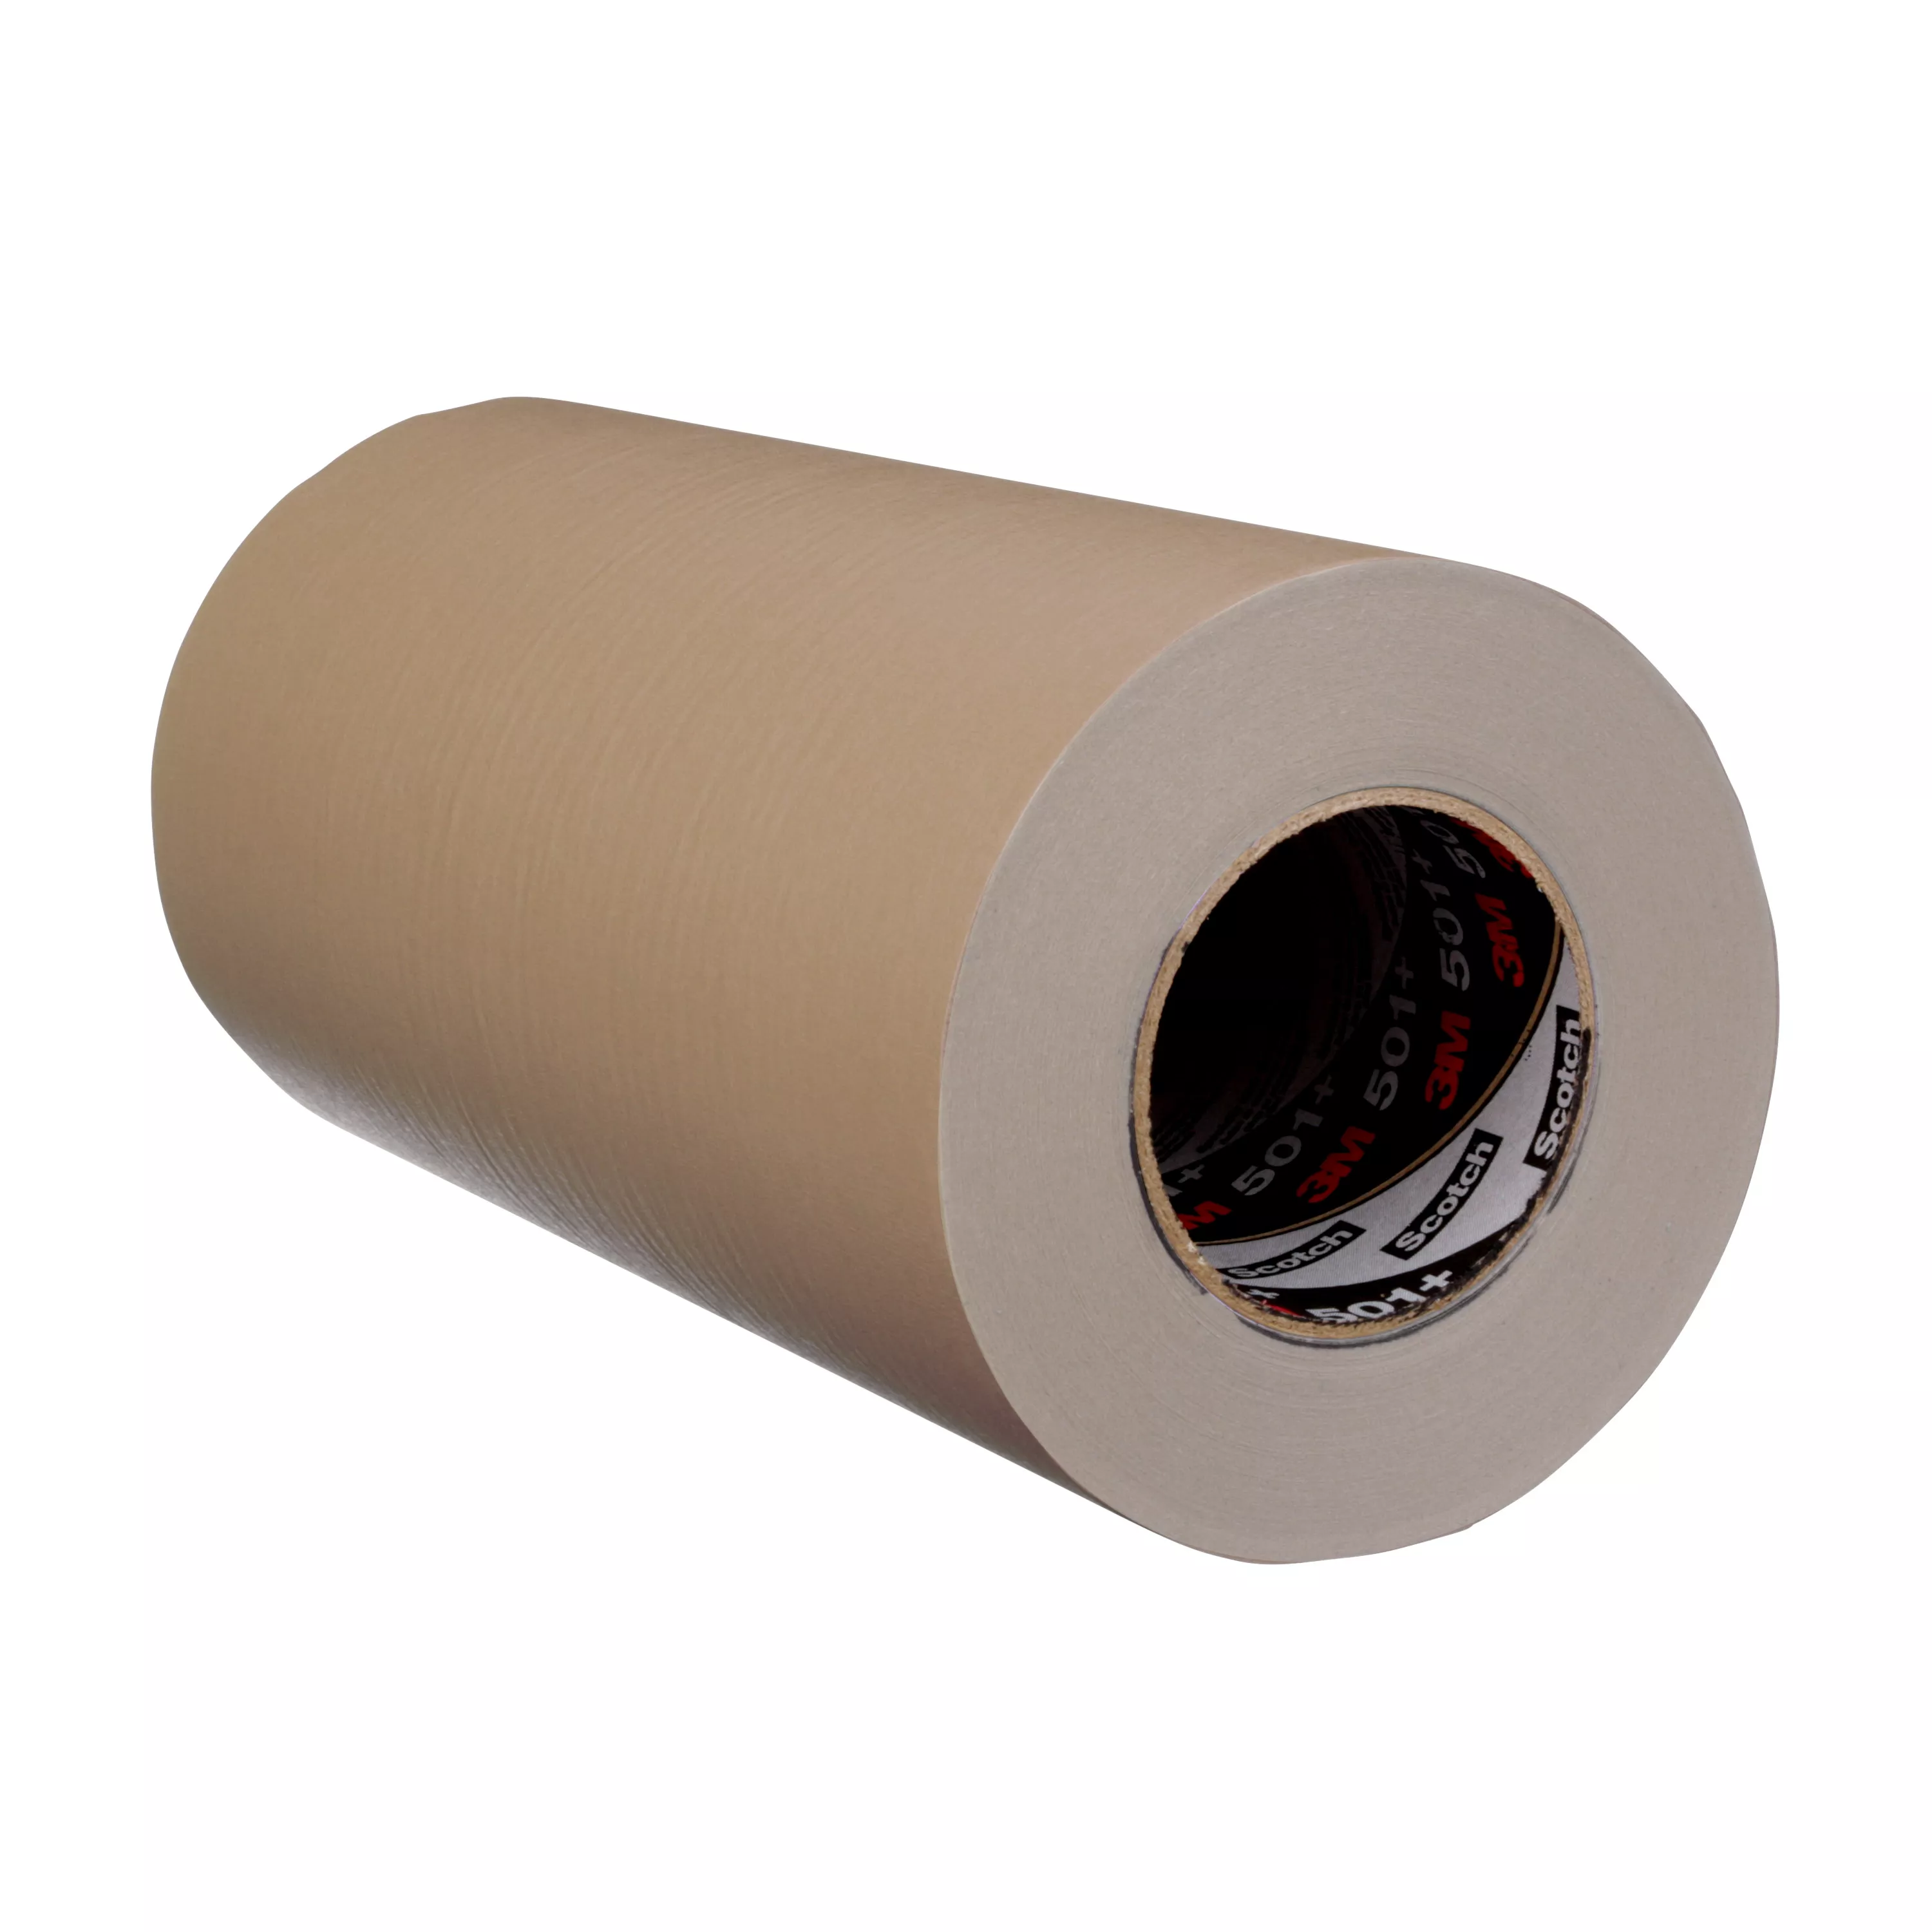 3M™ Specialty High Temperature Masking Tape 501+, Tan, 12 in x 60 yd,
7.3 mil, 4 Rolls/Case